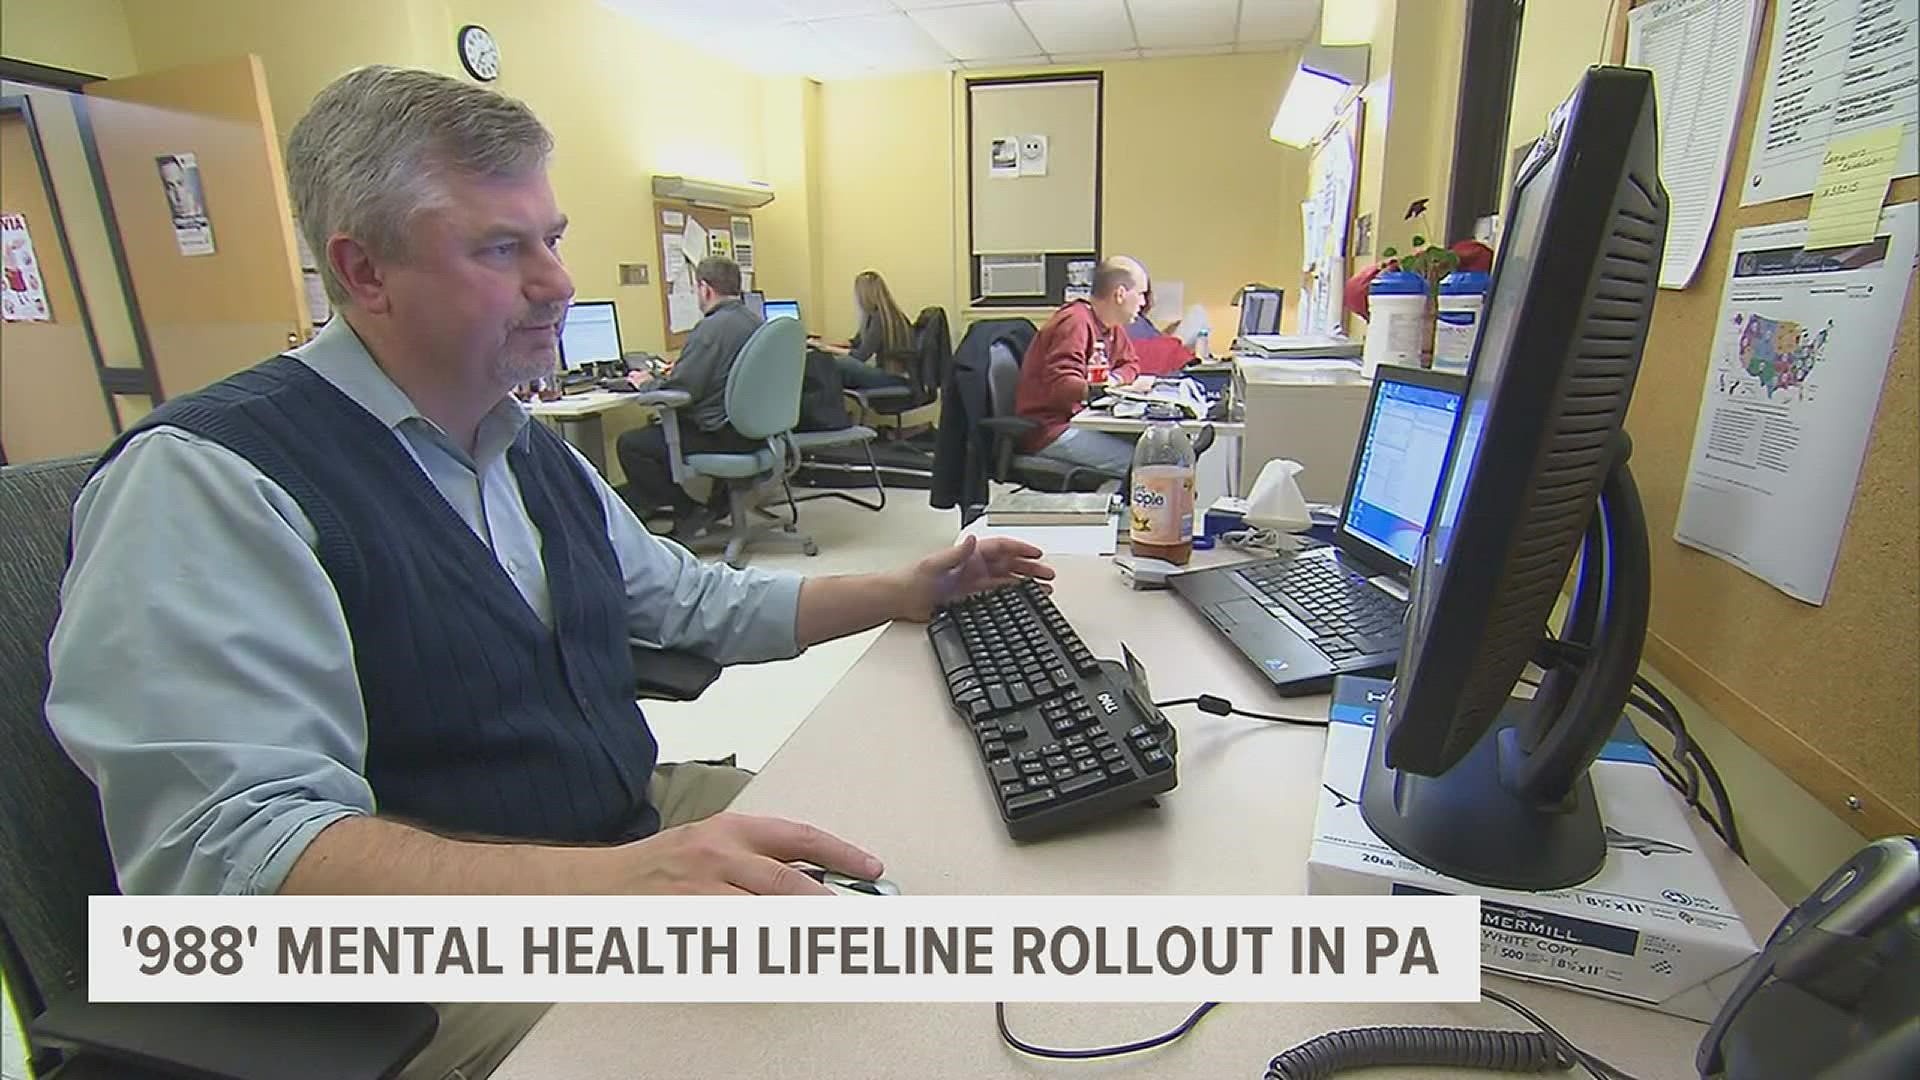 The Pennsylvania Department of Health Services says they will improve service at call centers in anticipation of an influx of calls